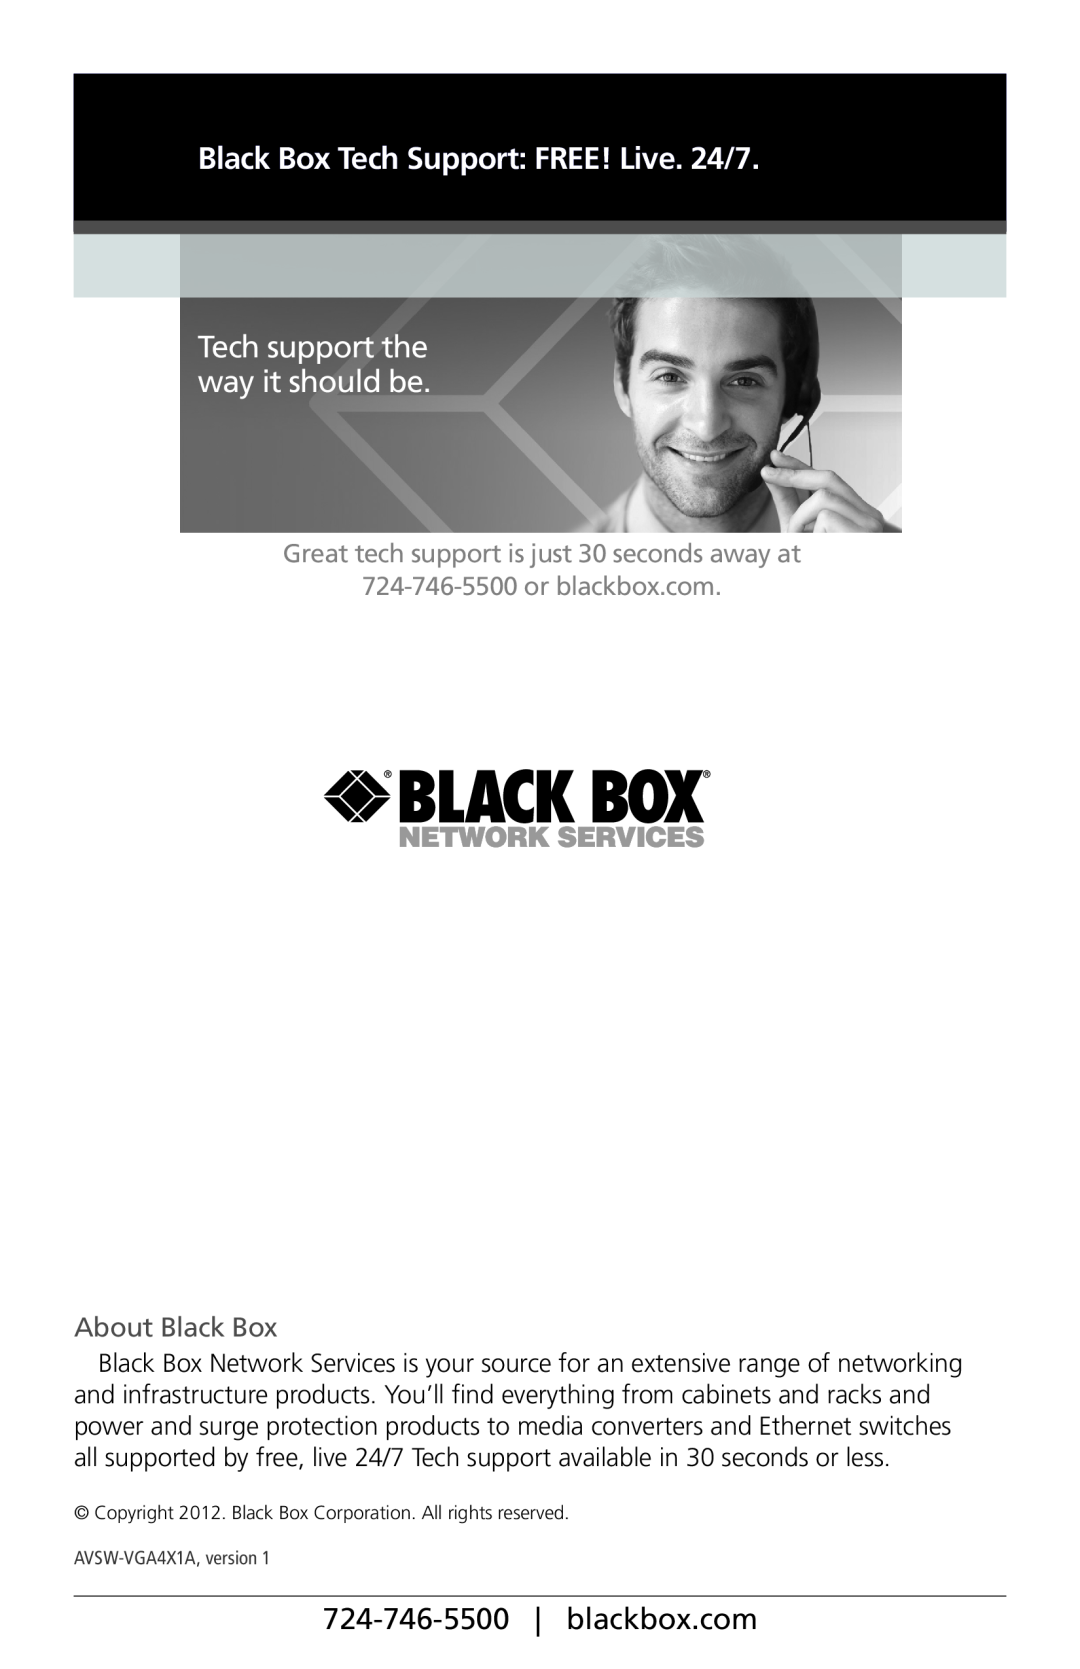 Black Box AVSW-VGA8X1A manual Tech support the way it should be, About Black Box, Black Box Tech Support FREE! Live. 24/7 